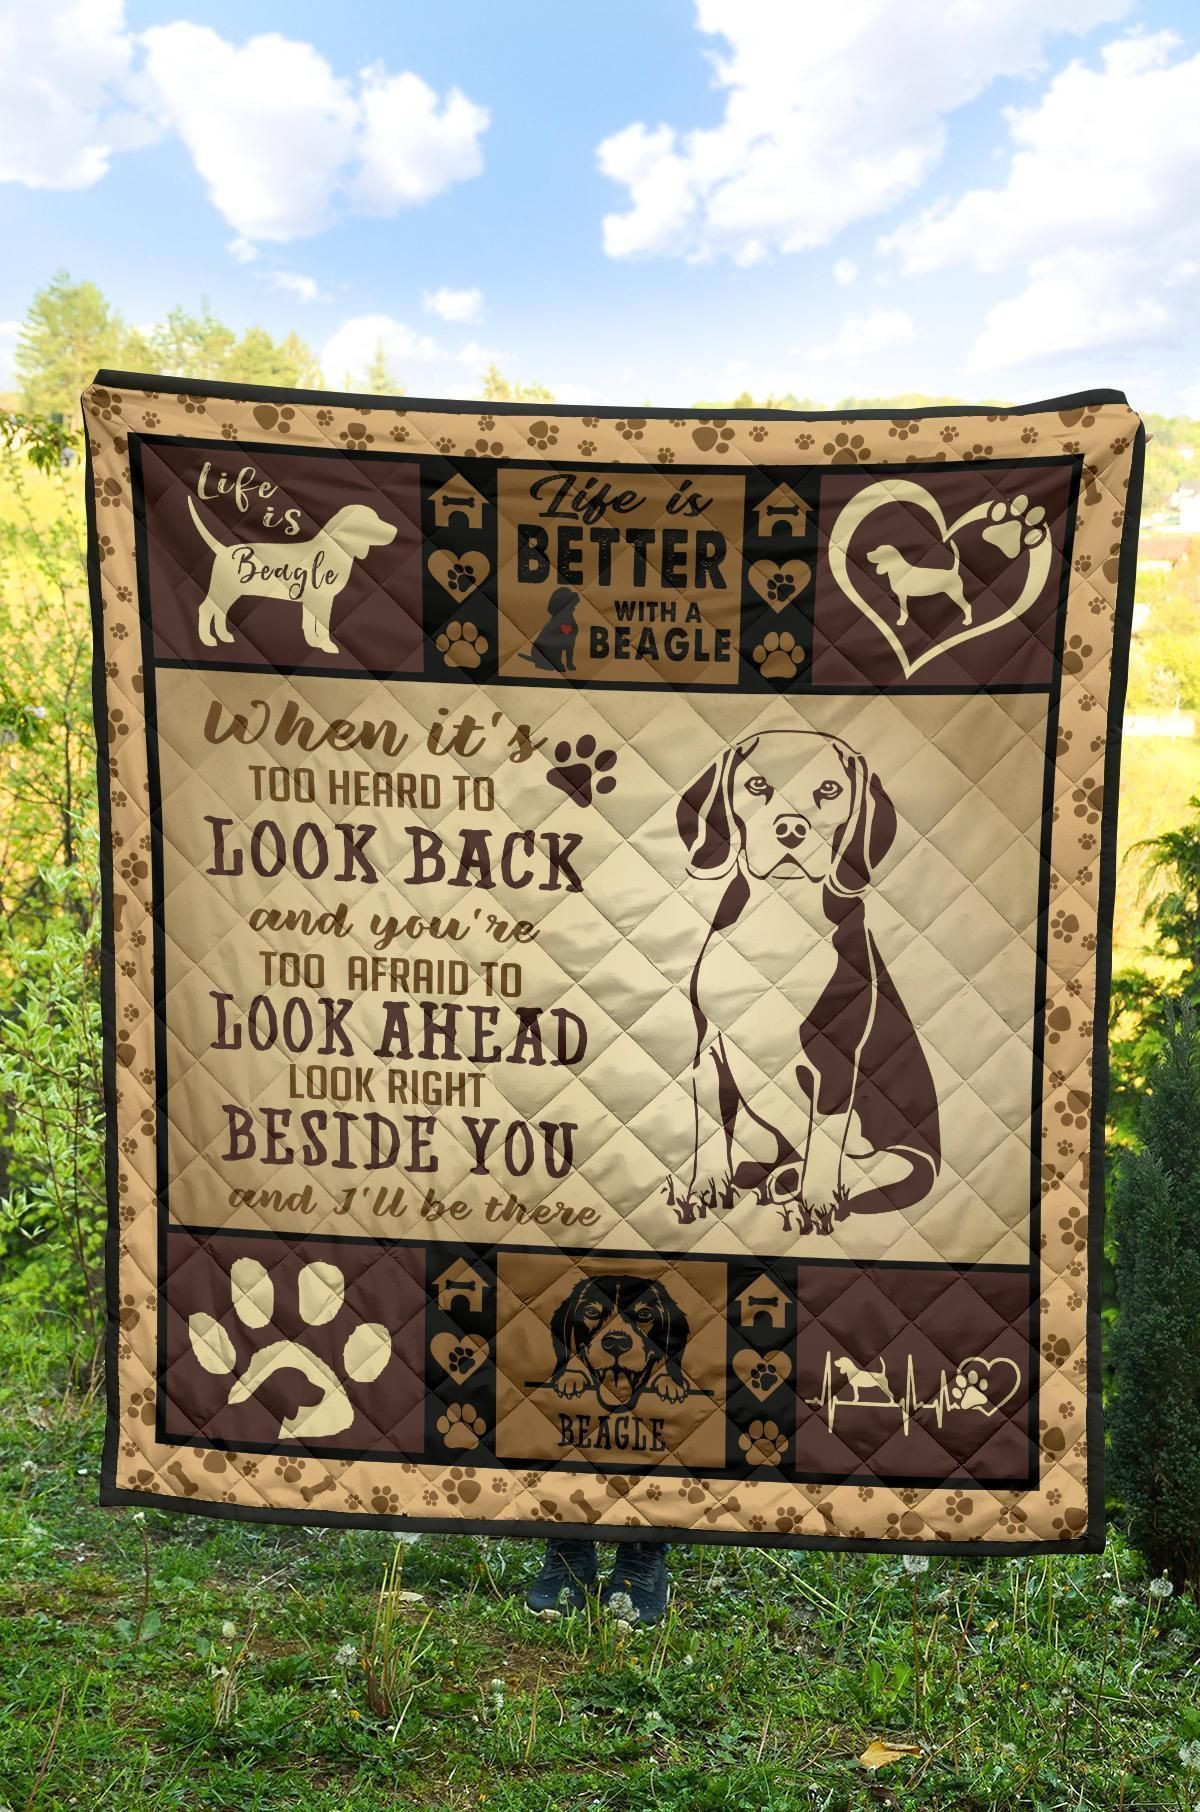 Beagle lover Life is Better With Beagle When it's too heard to look back and you're too afraid to look ahead and i'll be there Quilt Blanket TN01